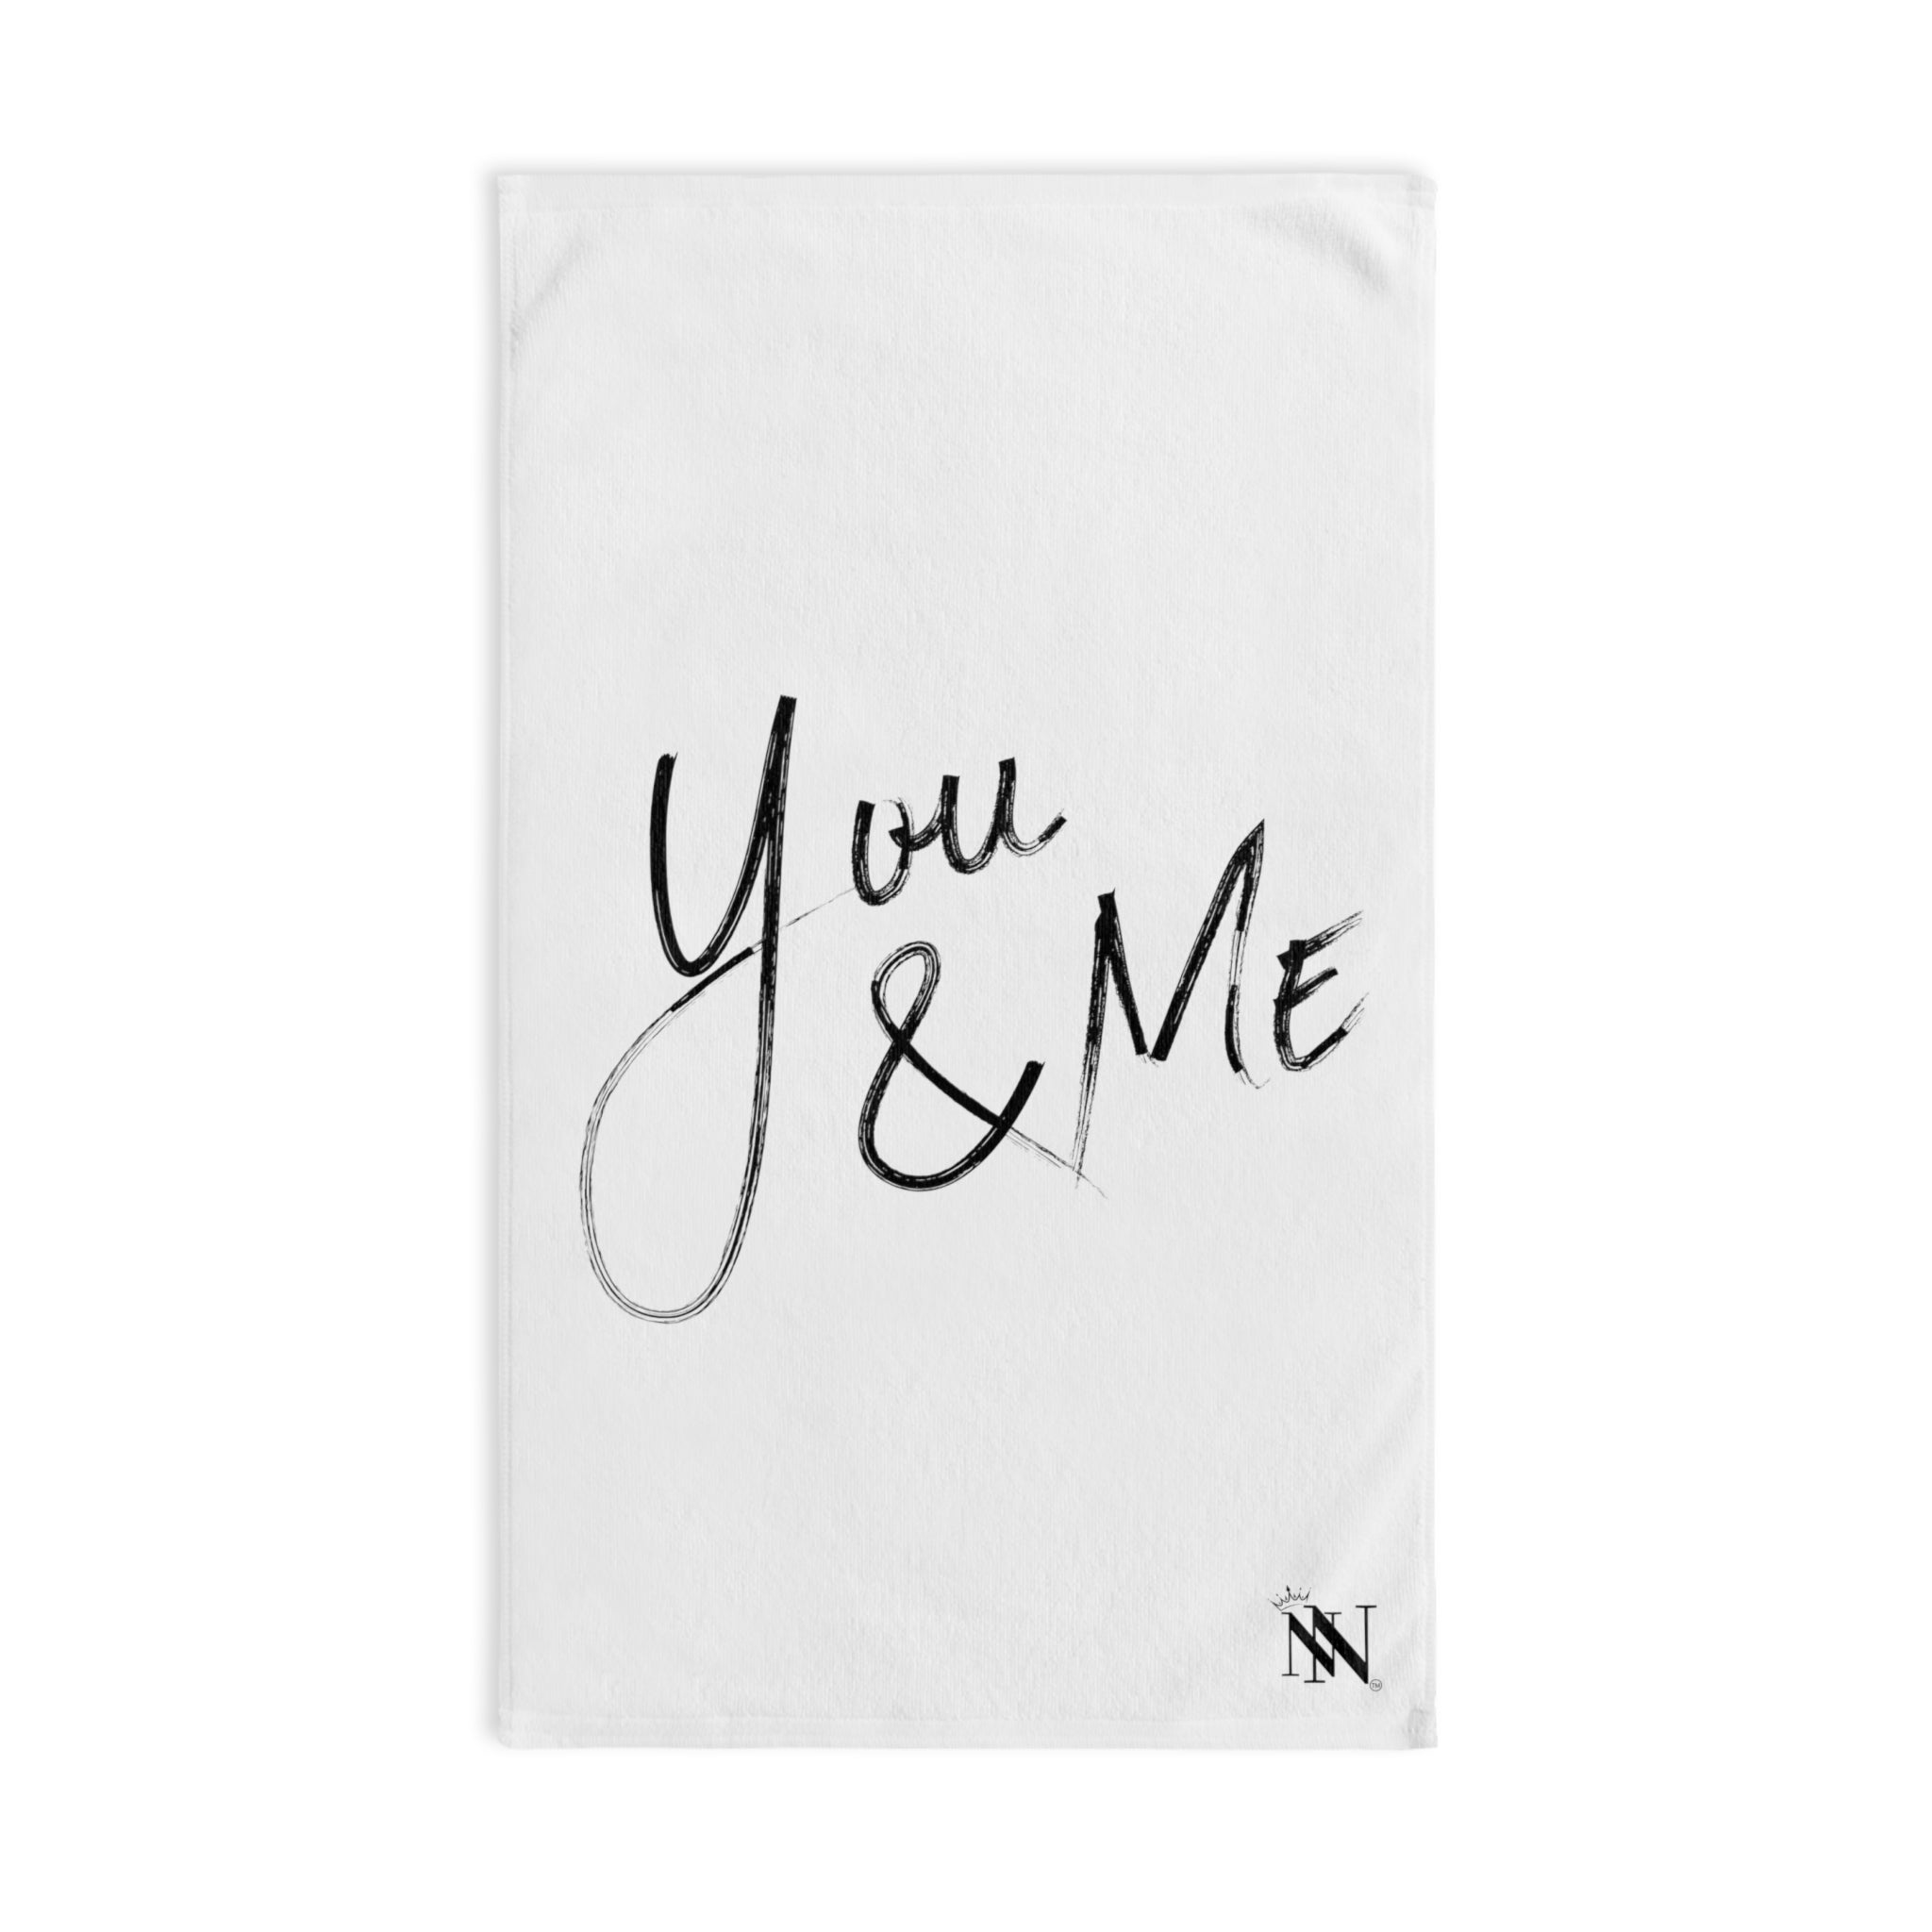 You & Me | Gifts for Boyfriend, Funny Towel Romantic Gift for Wedding Couple Fiance First Year Anniversary Valentines, Party Gag Gifts, Joke Humor Cloth for Husband Men BF NECTAR NAPKINS